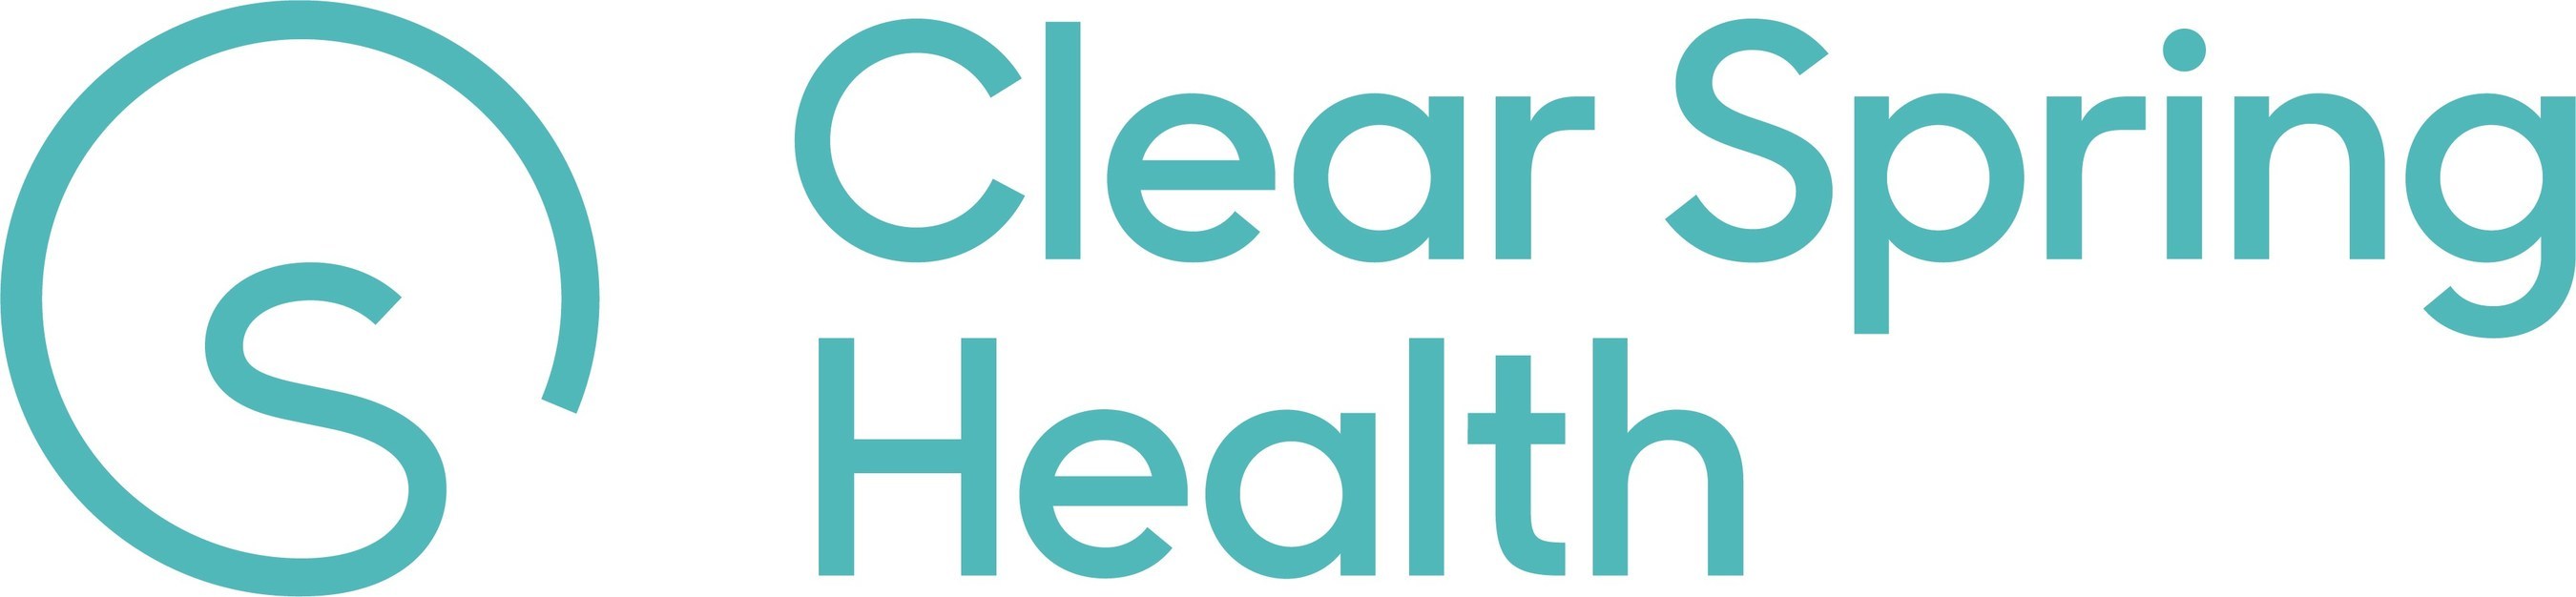 Clear Spring Health Completes Acquisition of Community Care Alliance of